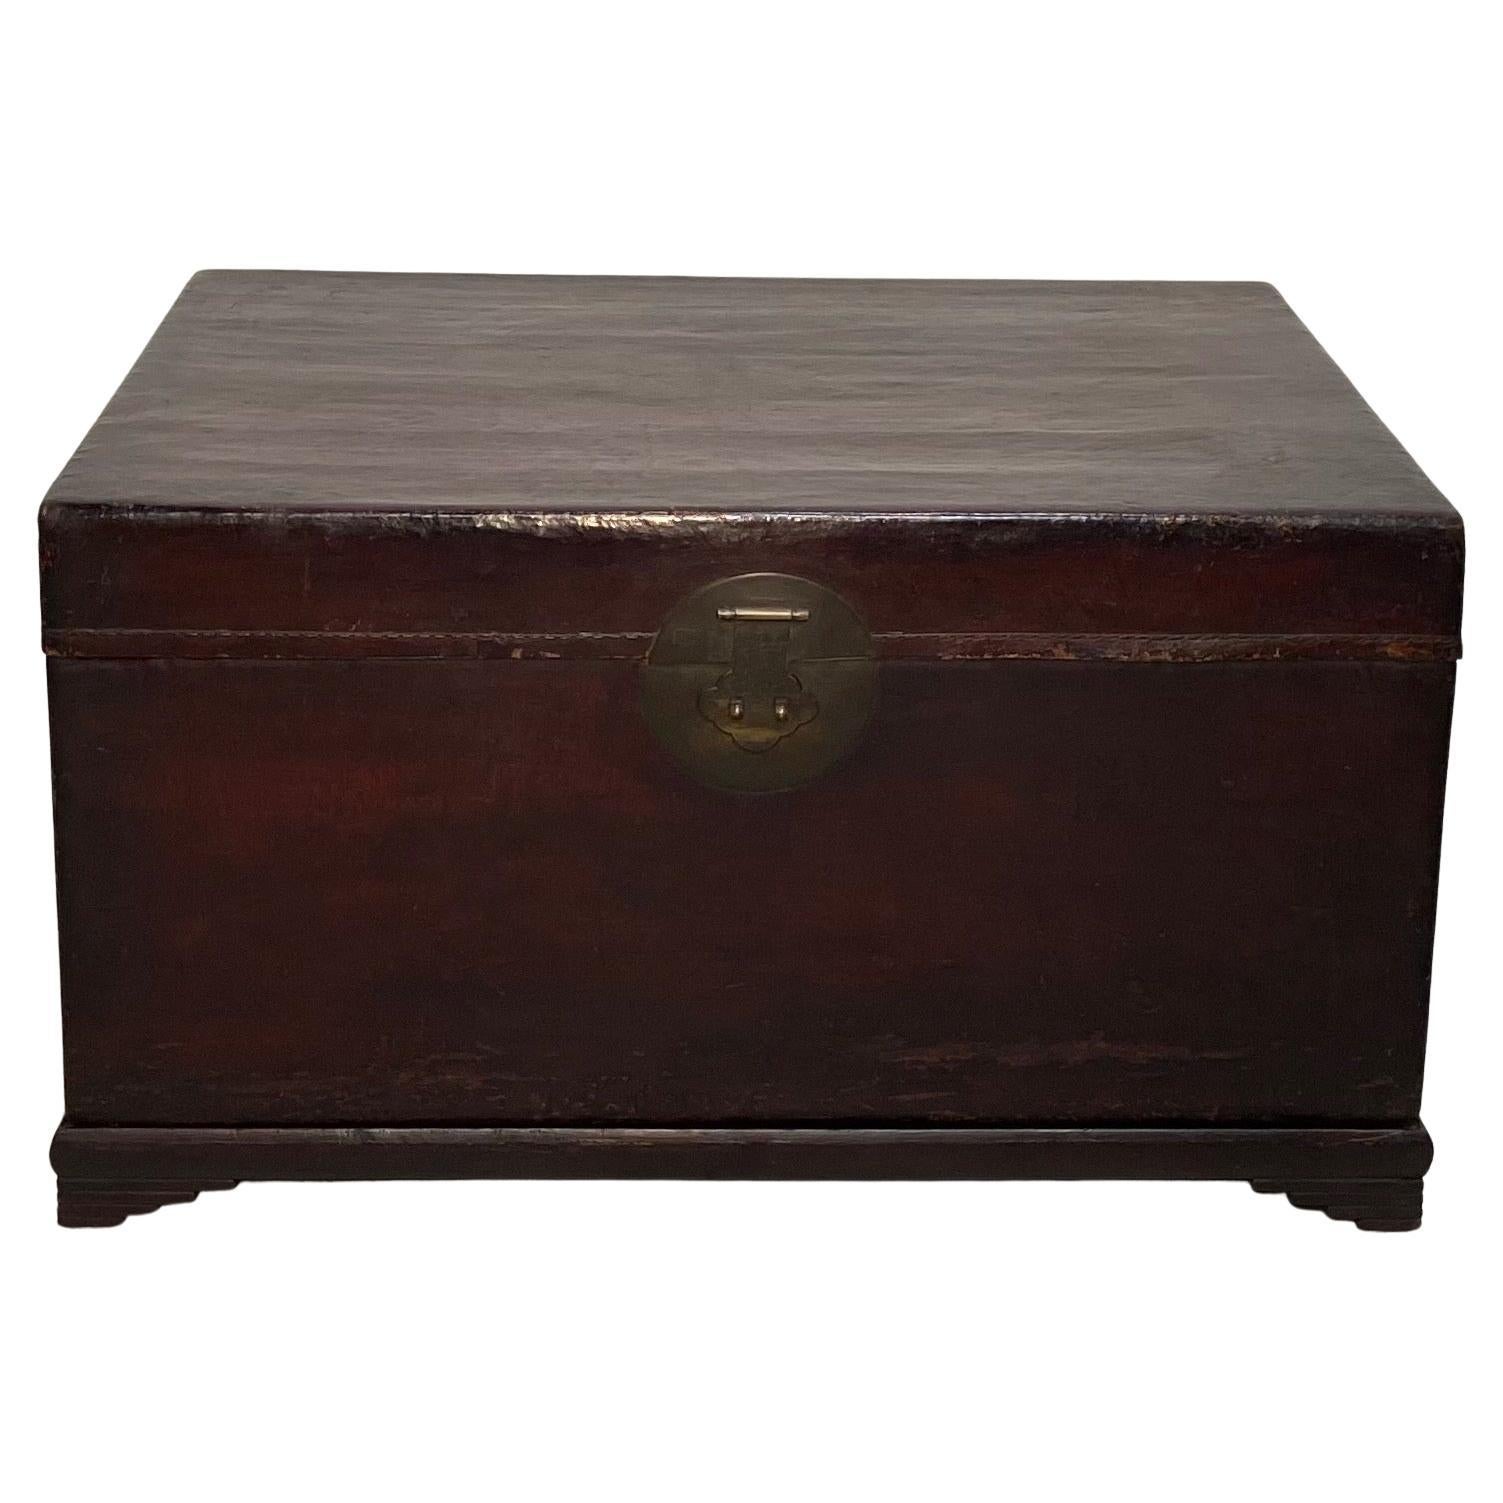 19th Century Chinese Export Leather Trunk on Stand For Sale